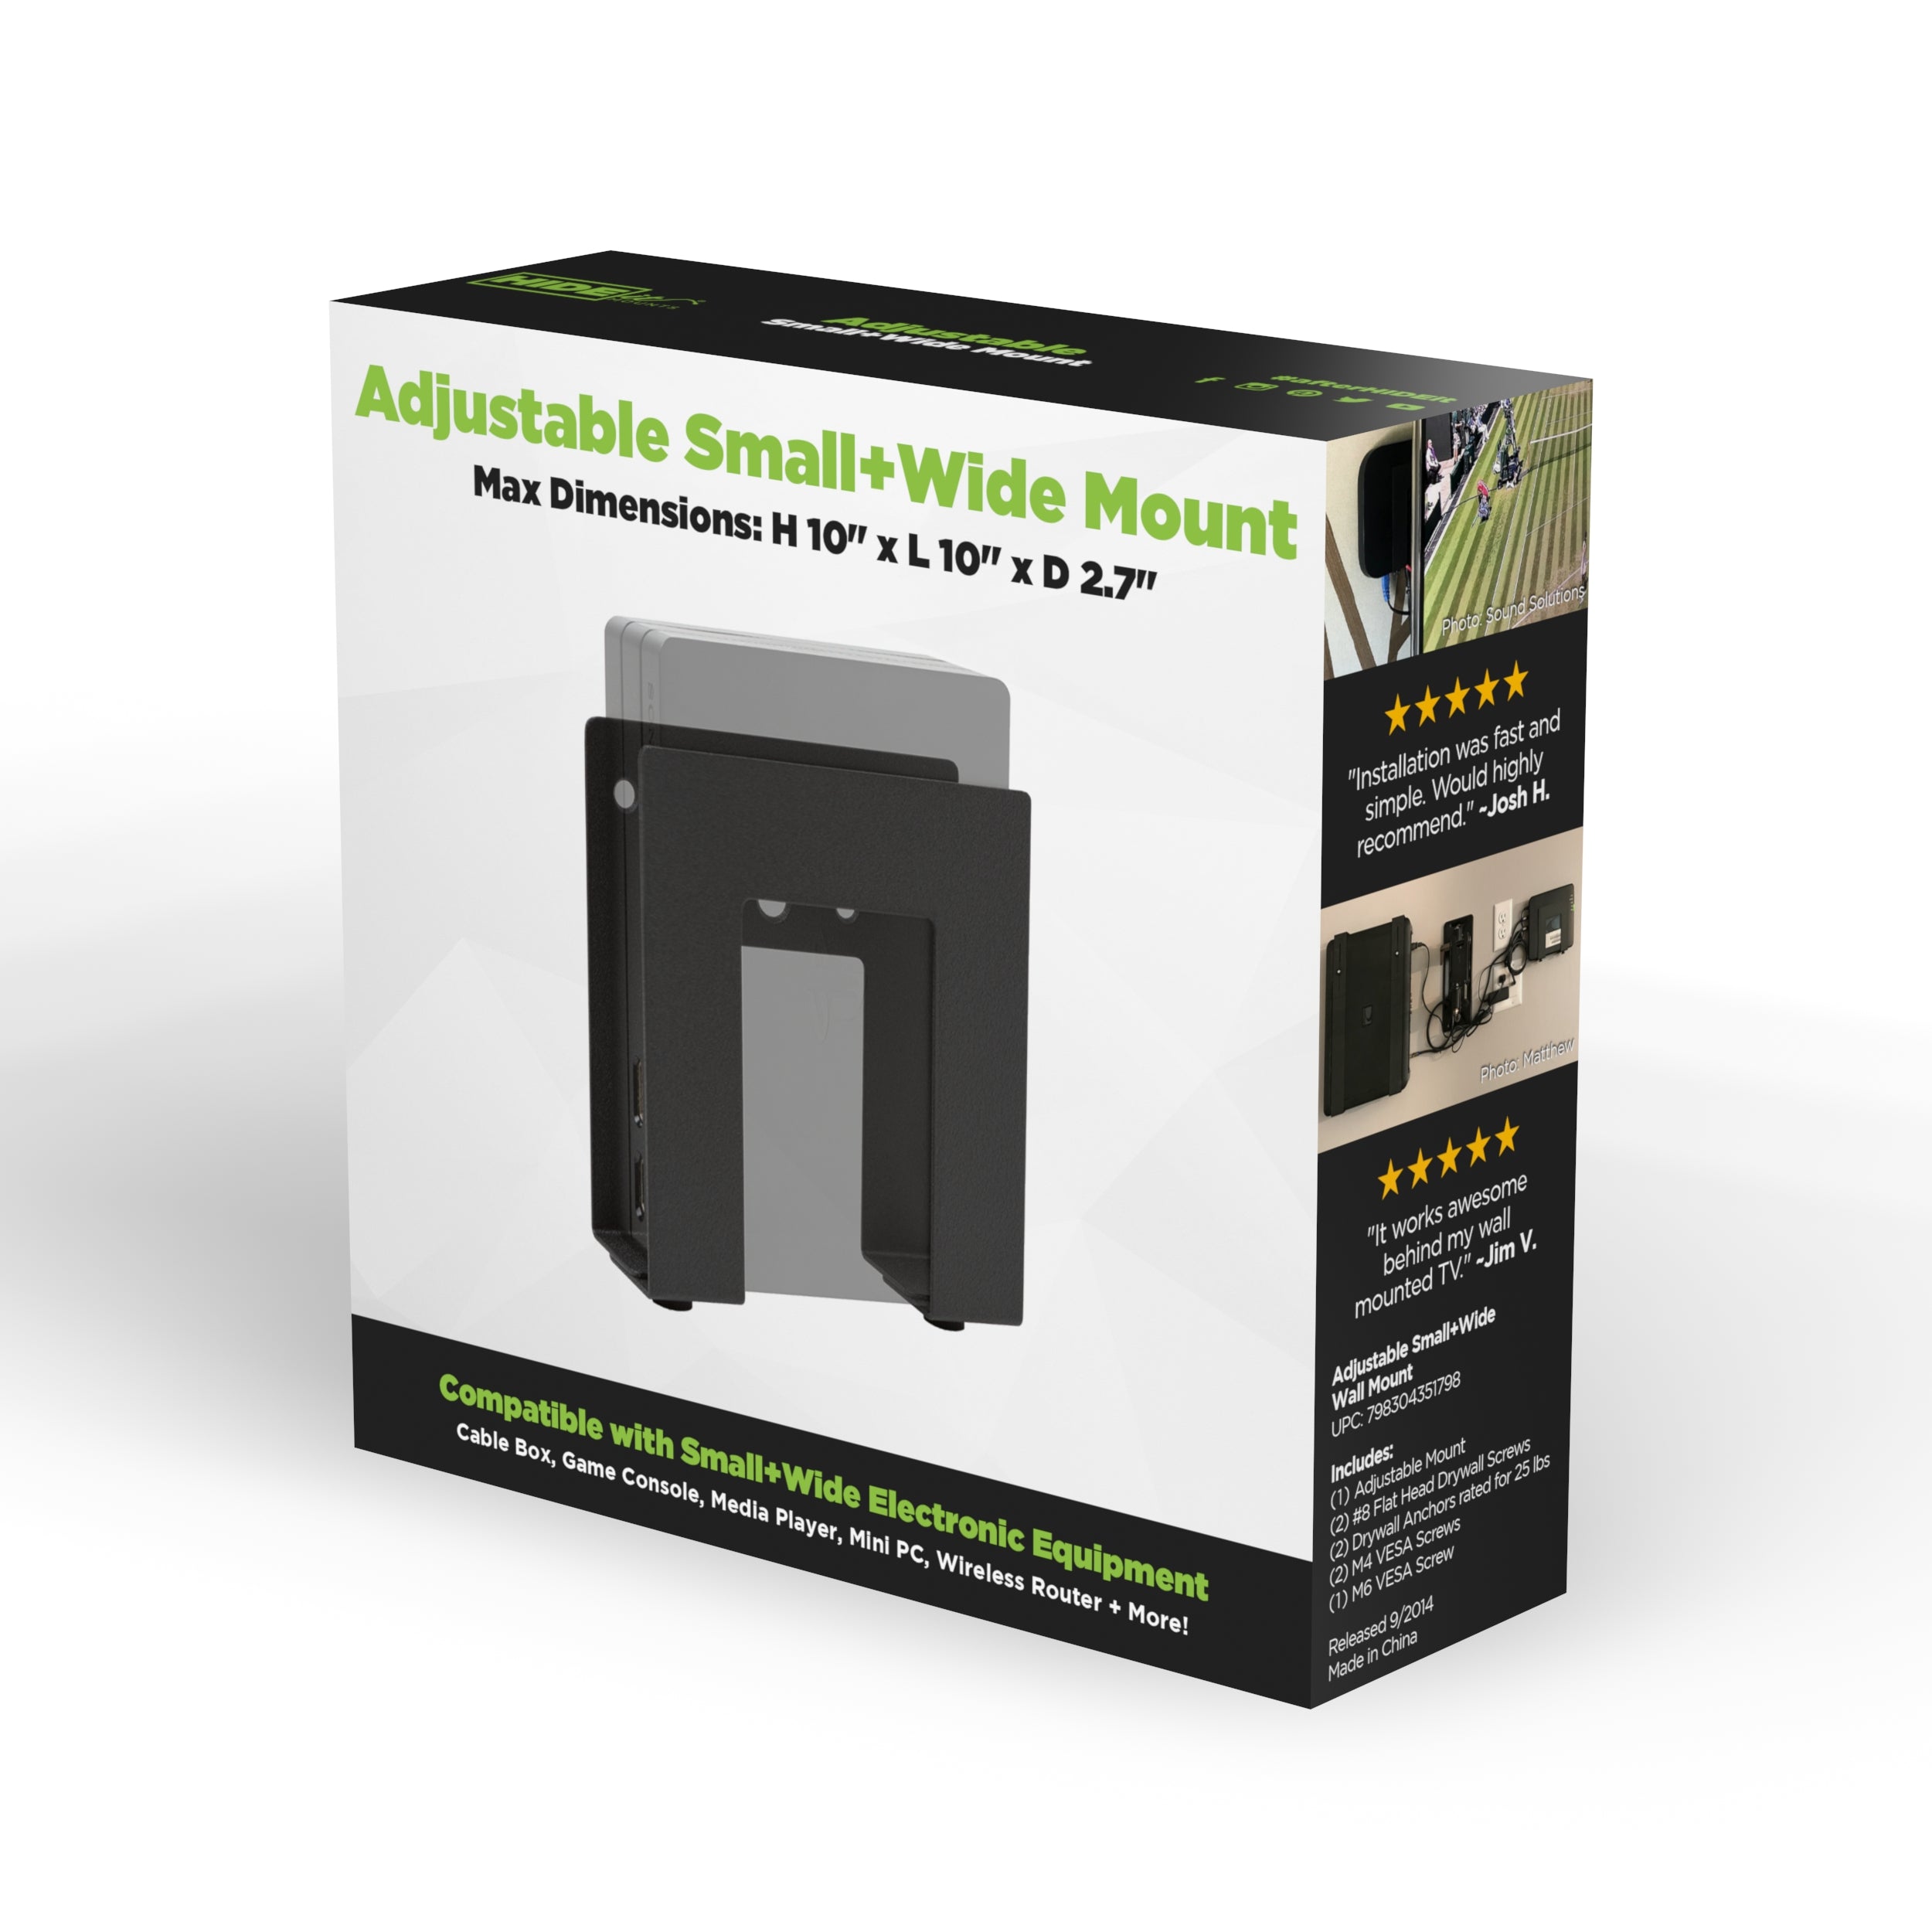 W - HIDEit Uni-SW Retail Packaging | Universal Small + Wide Electronic + Cable Box Mounts in Retail Packaging